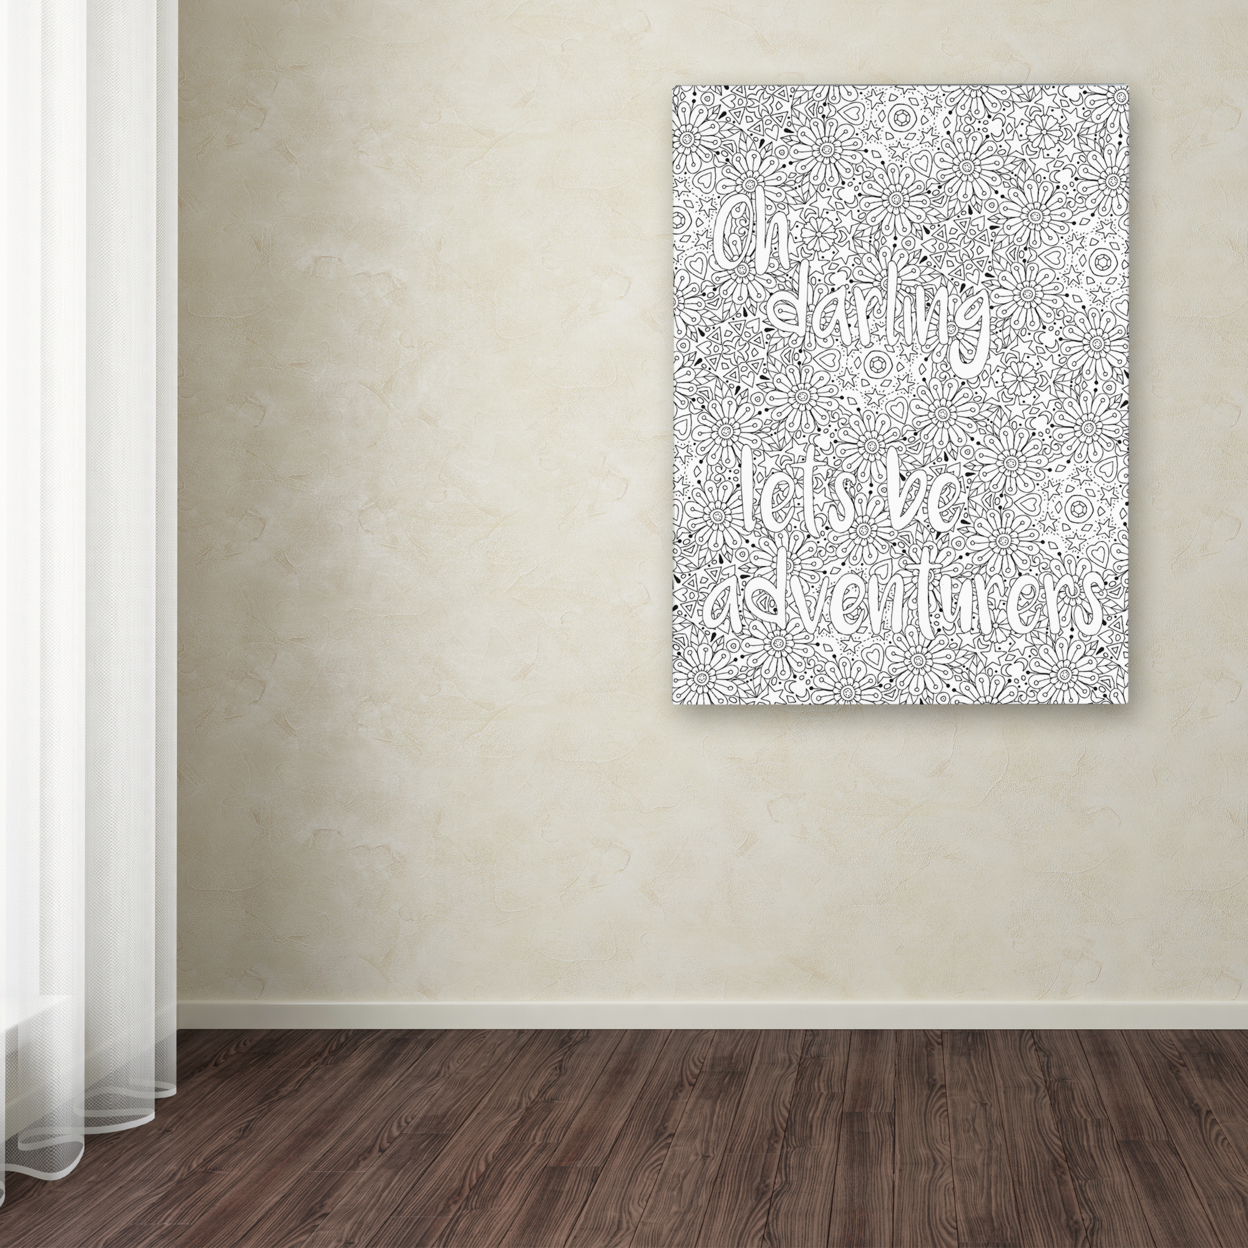 Hello Angel 'Inspirational Quotes 30' Canvas Wall Art 35 X 47 Inches